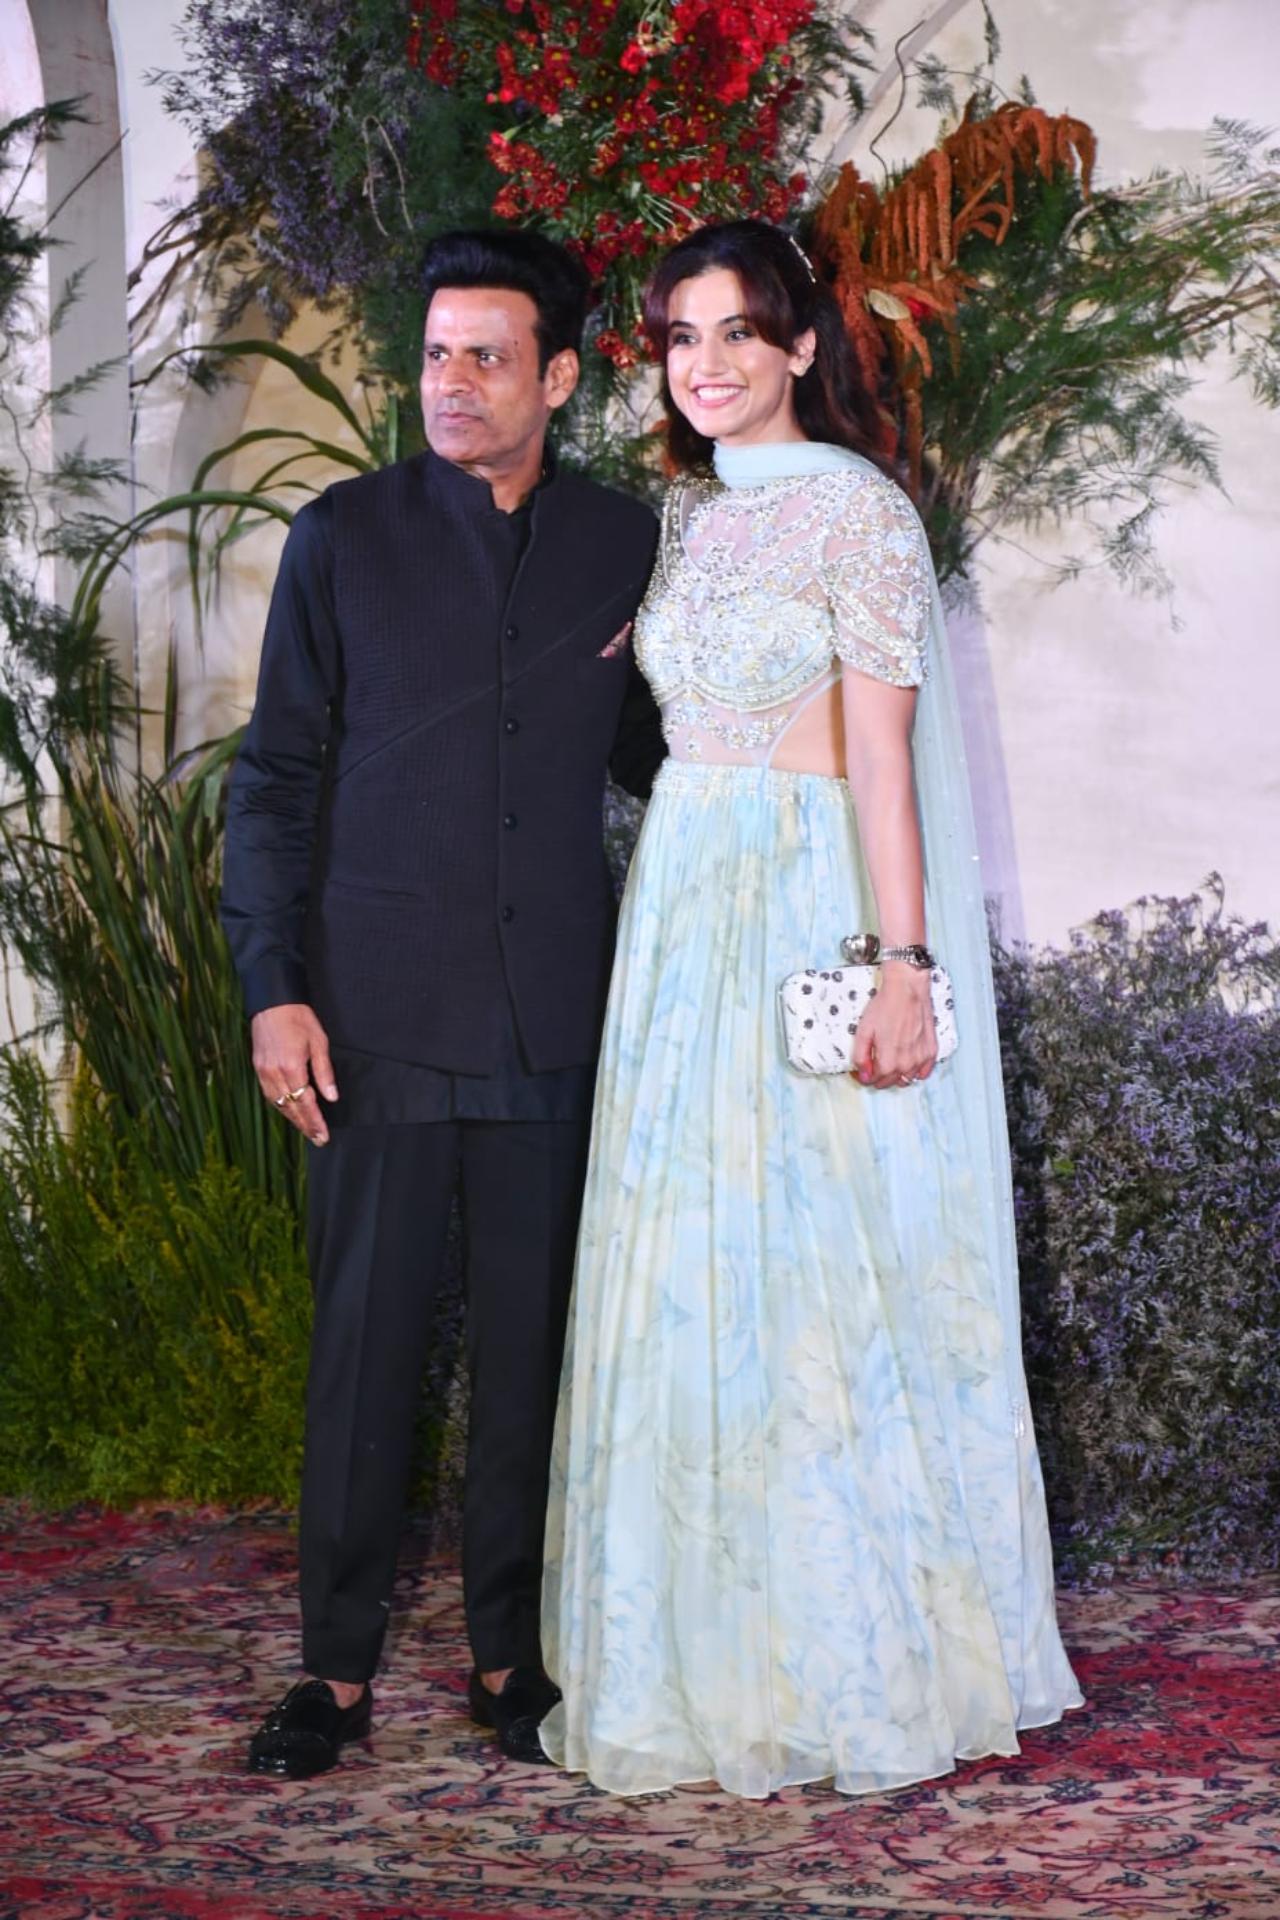 Manoj Bajpayee was wearing a black outfit which included a black shirt, trousers and jacket. Taapsee Pannu looked breathtaking in her icy blue traditional attire